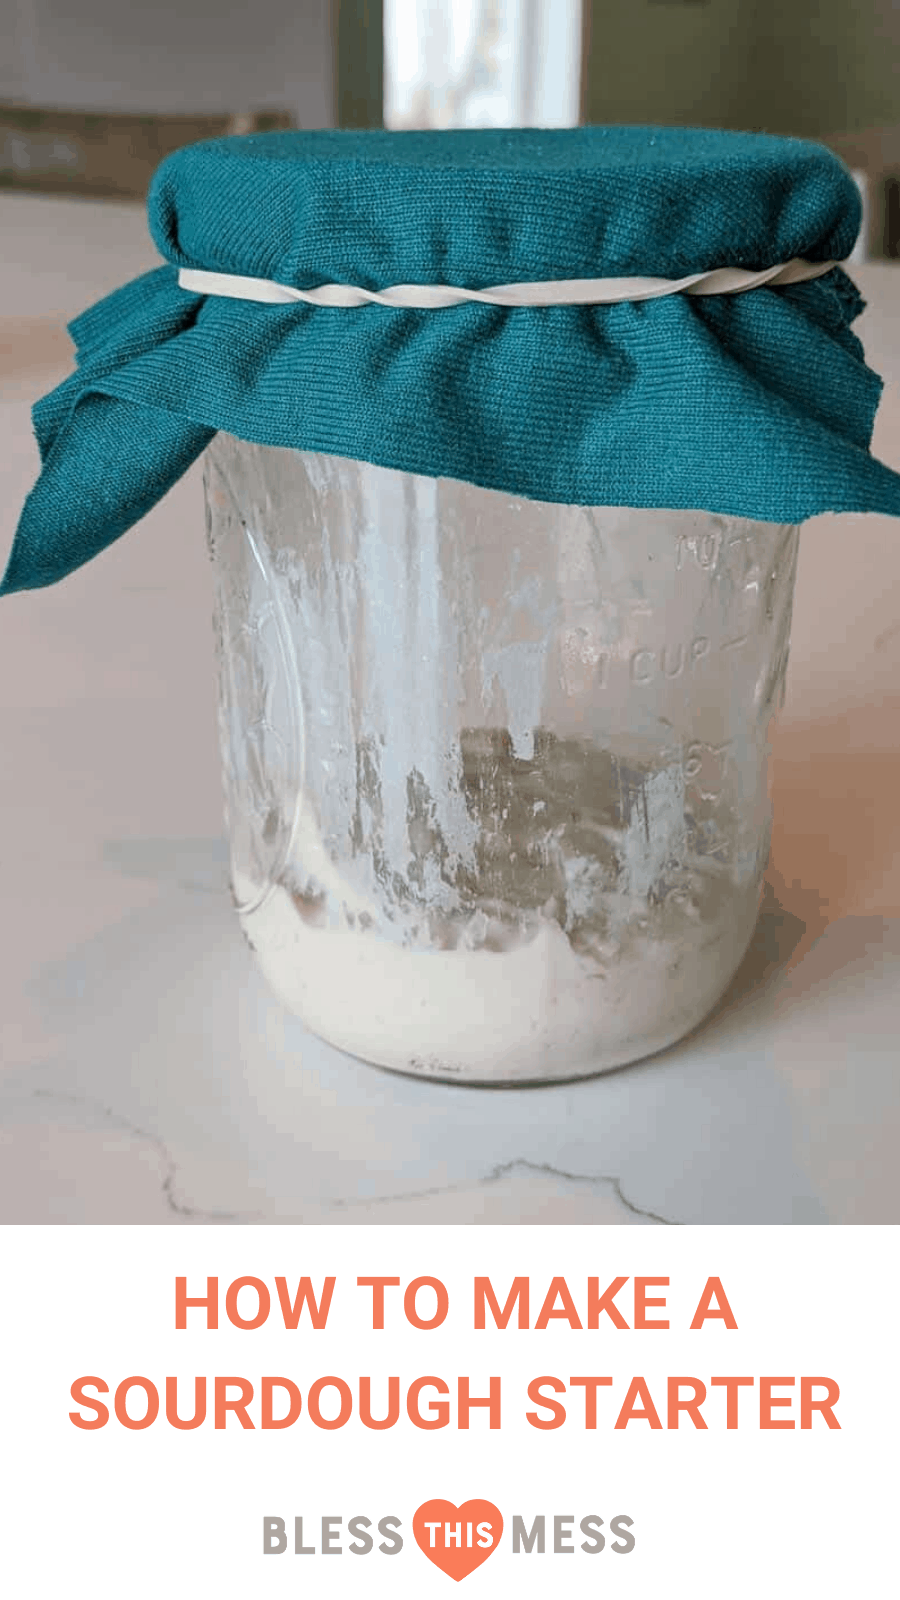 sour dough starter in glass jar with blue cloth and rubberband covering top